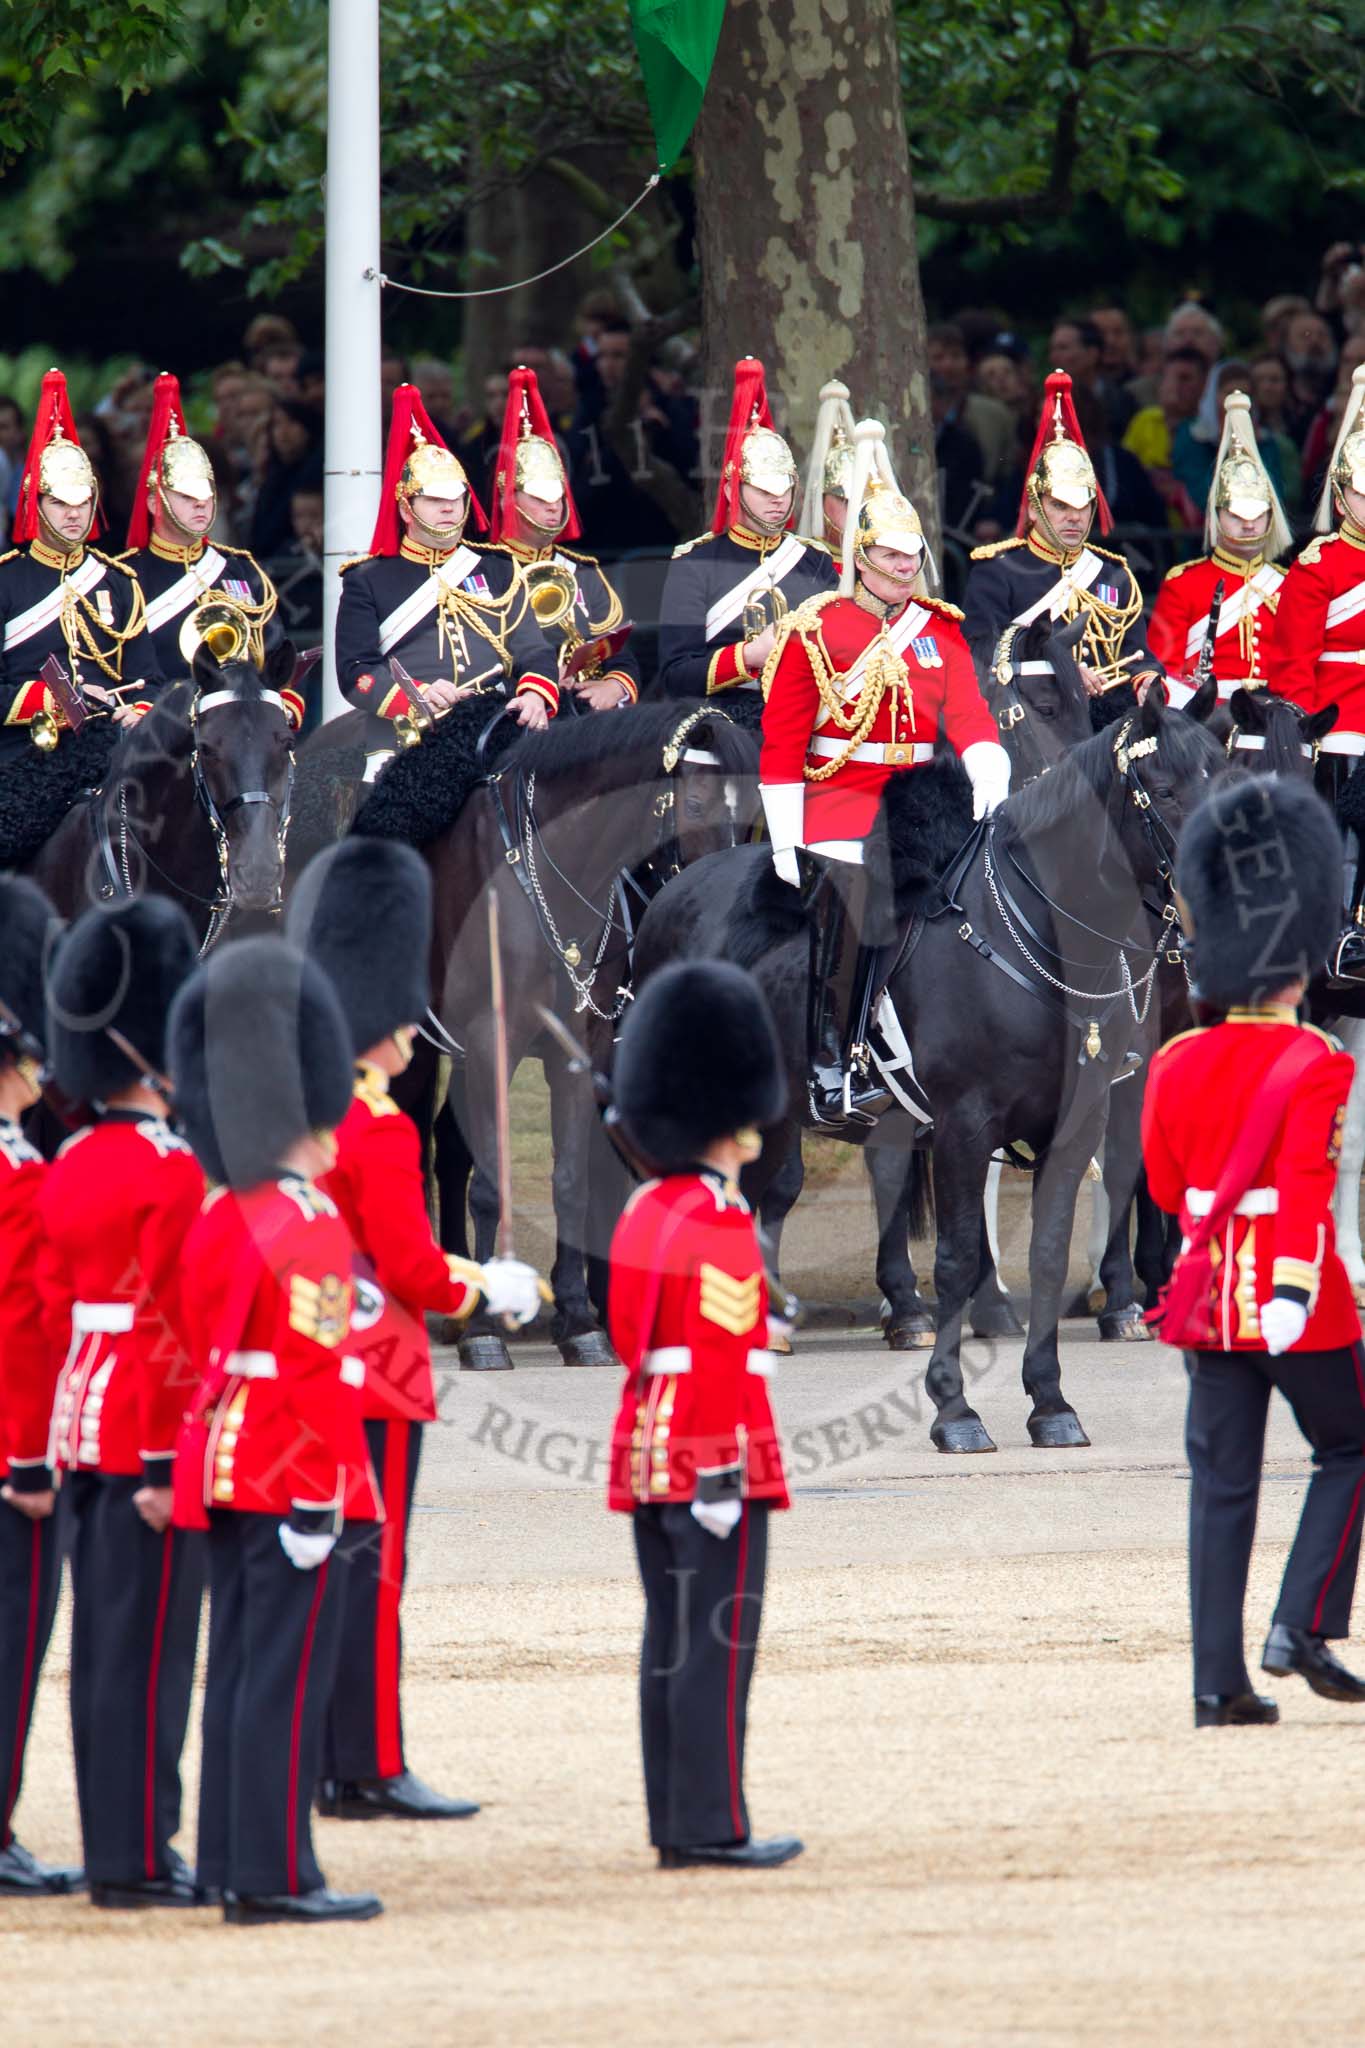 The Major General's Review 2011: The Mounted Bands of the Household Cavalry. On the left the Band of the Blues and Royals, on the right The Life Guards Band. In the middle, in red, the Director of Music, Major K L Davies, The Life Guards..
Horse Guards Parade, Westminster,
London SW1,
Greater London,
United Kingdom,
on 28 May 2011 at 11:29, image #184